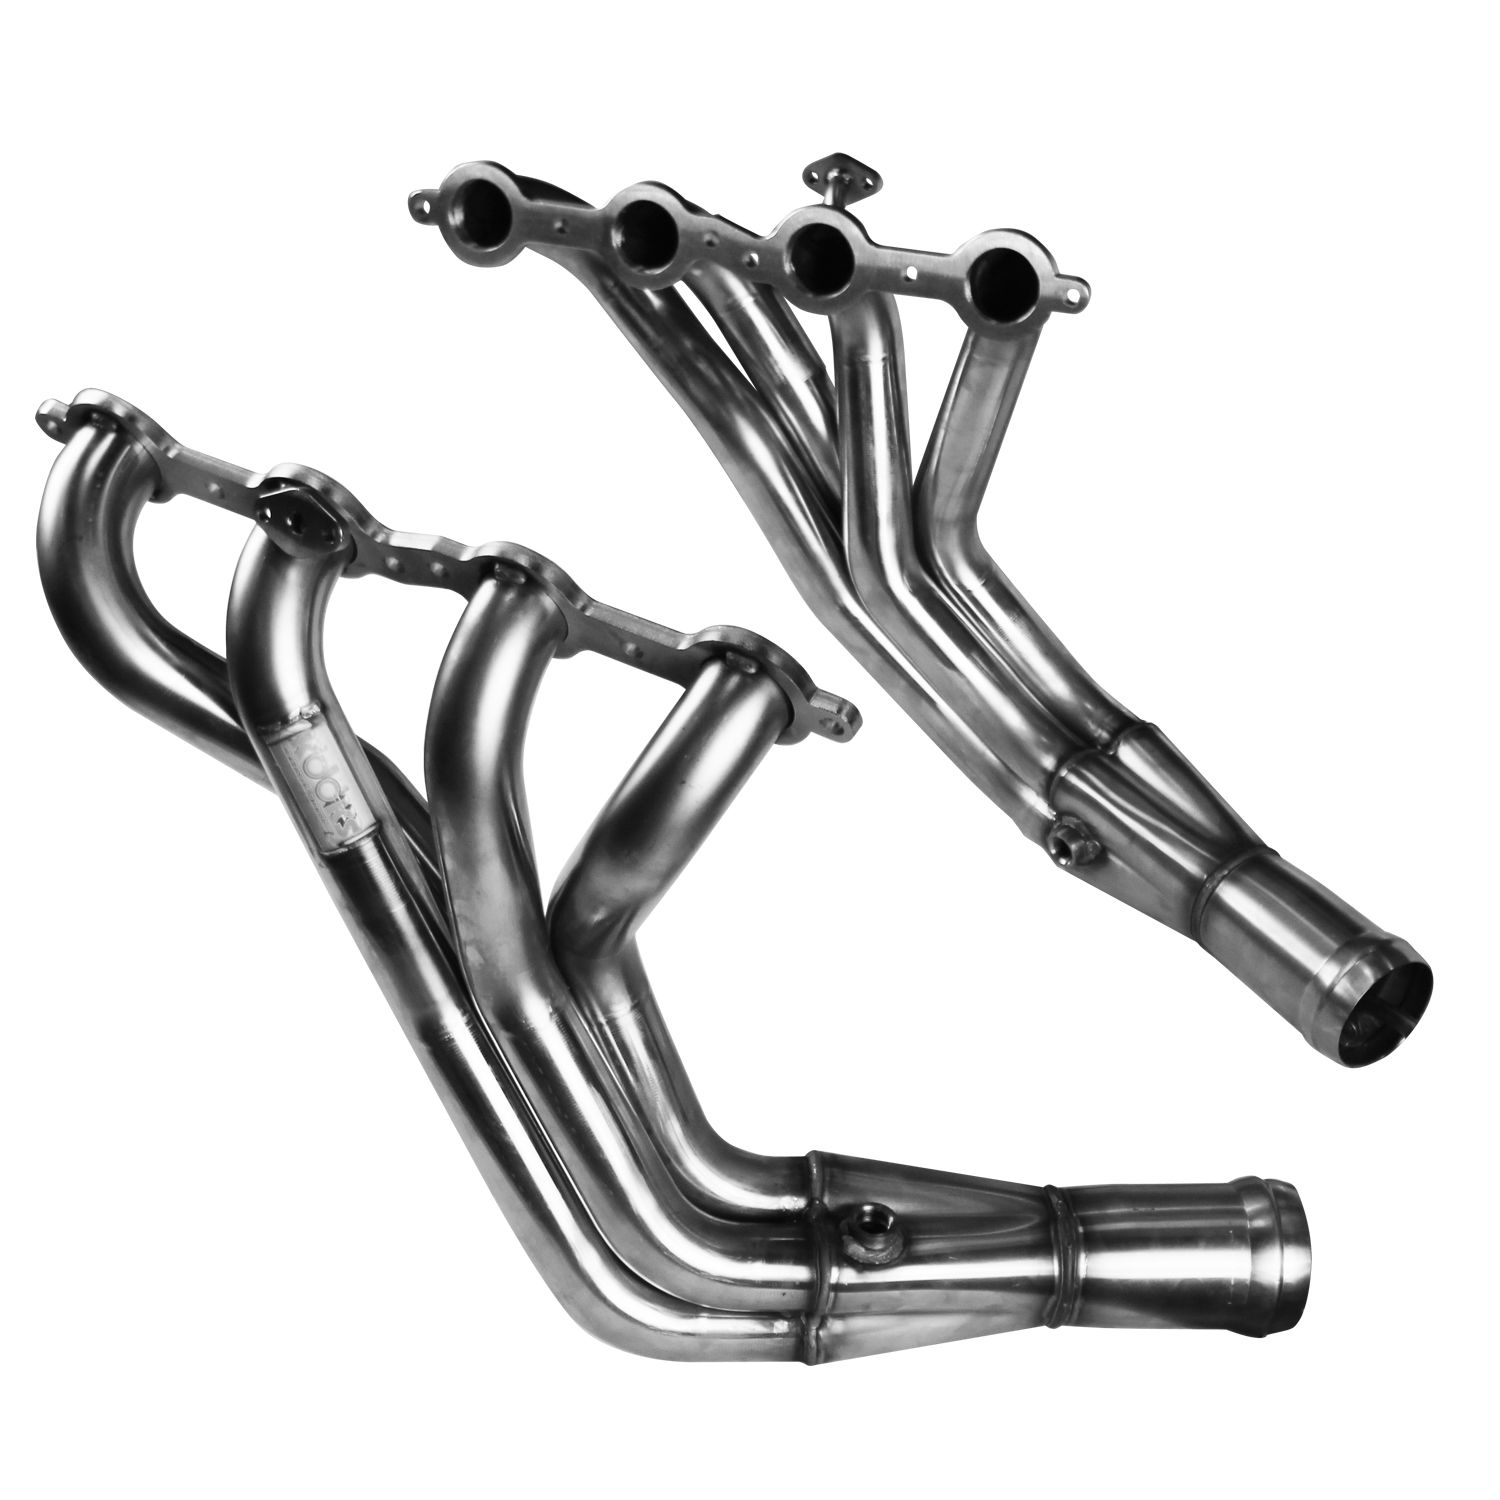 Stainless Steel Headers Street Version 1.75 x 3" Long Tube 01-04 Corvette C5 LS1/LS6 5.7L w/Air Tubes And O2 Fittings w/Merge Co